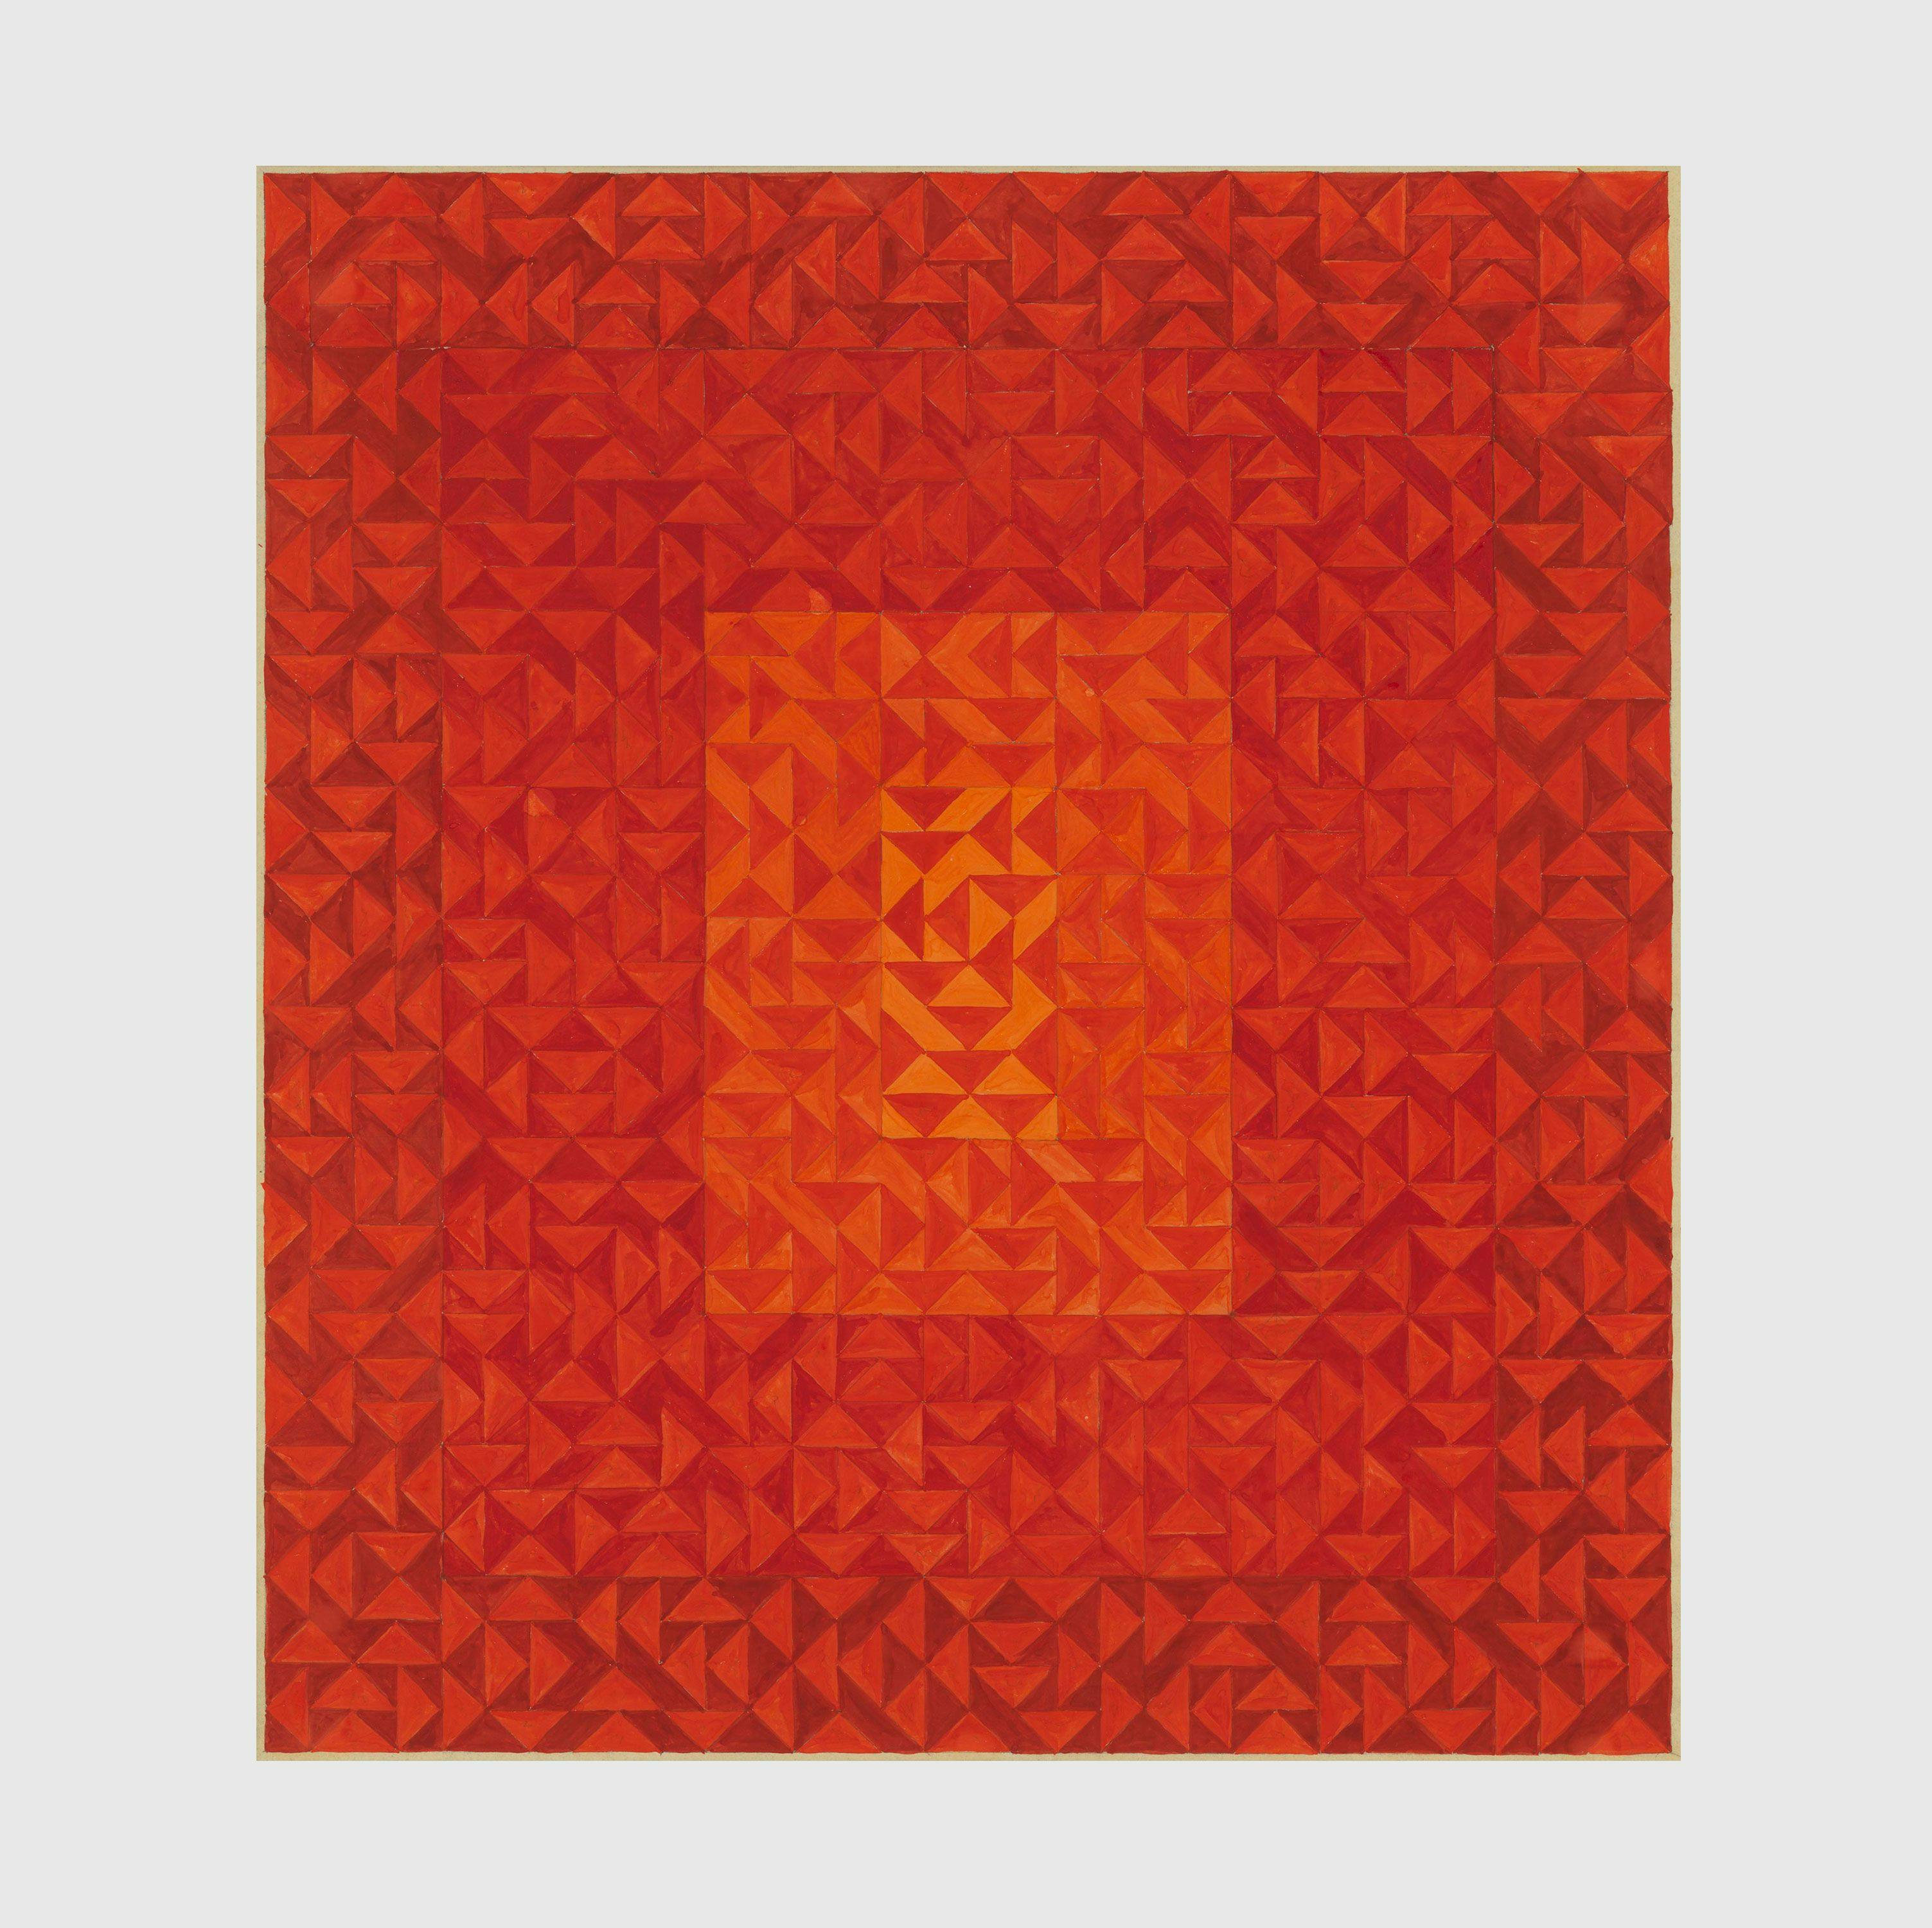 A drawing by Anni Albers, titled Color study, circa 1970.